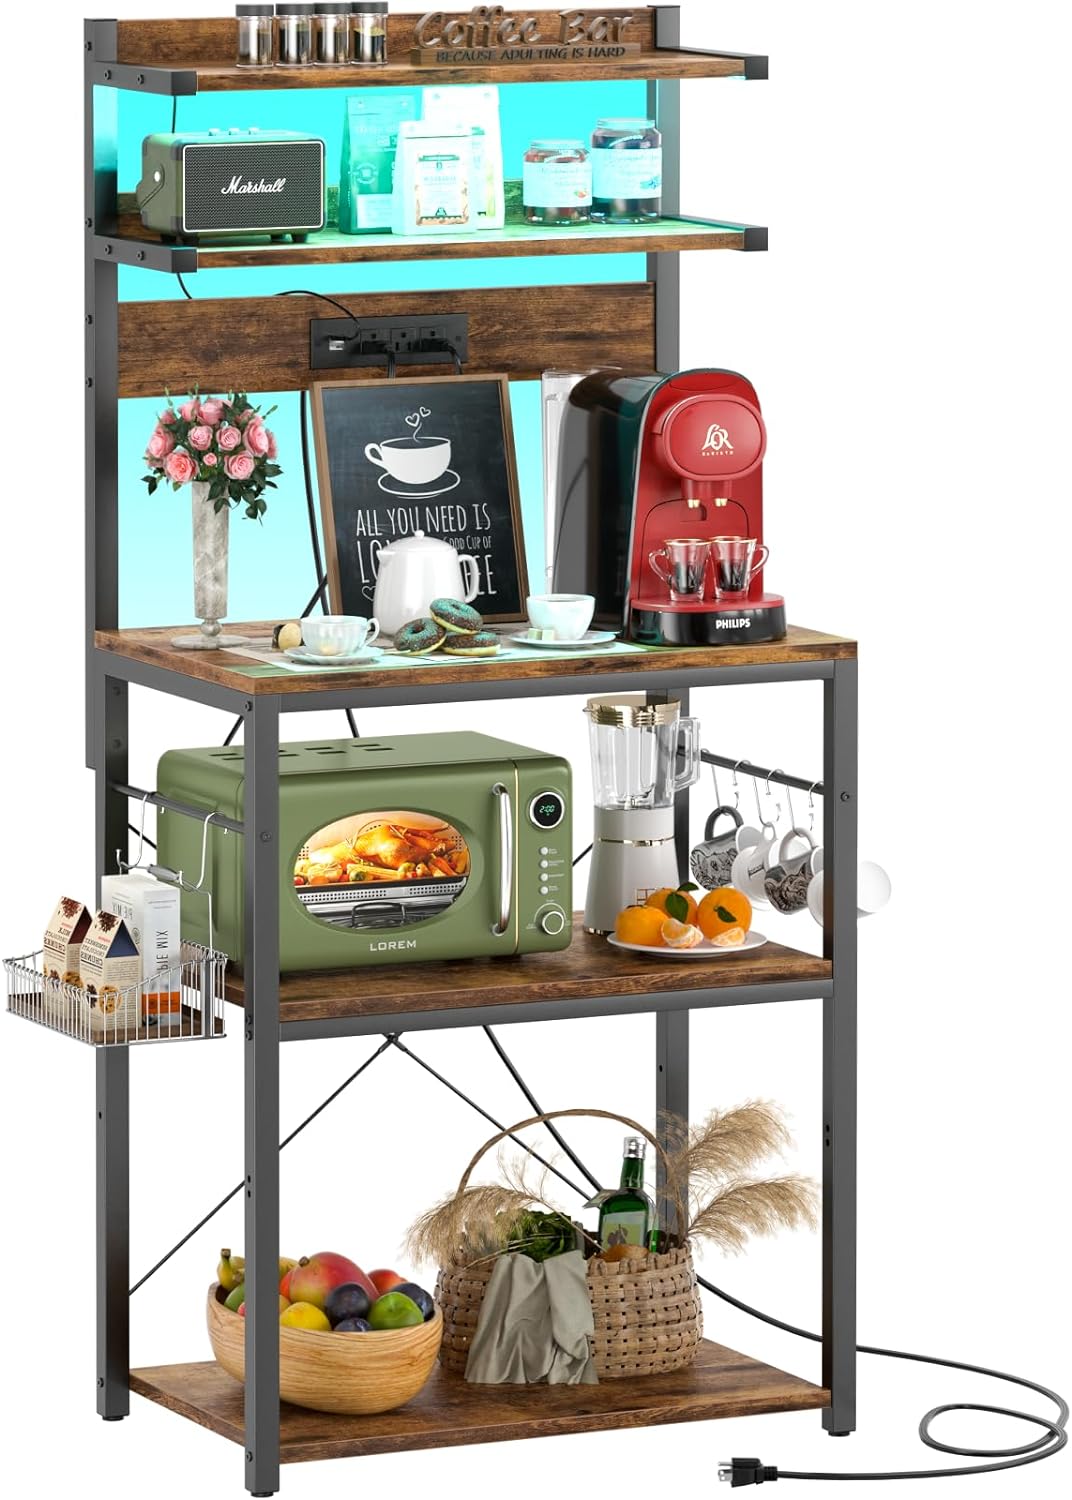 Aheaplus Bakers Rack with Power Outlet, Microwave Stand, 5 Tiers Coffee Bar Station with Led Lights, Kitchen Storage Shelf with 6 S-Shaped Hooks, Kitchen Rack for Spices, Pots and Pans, Rustic Brown